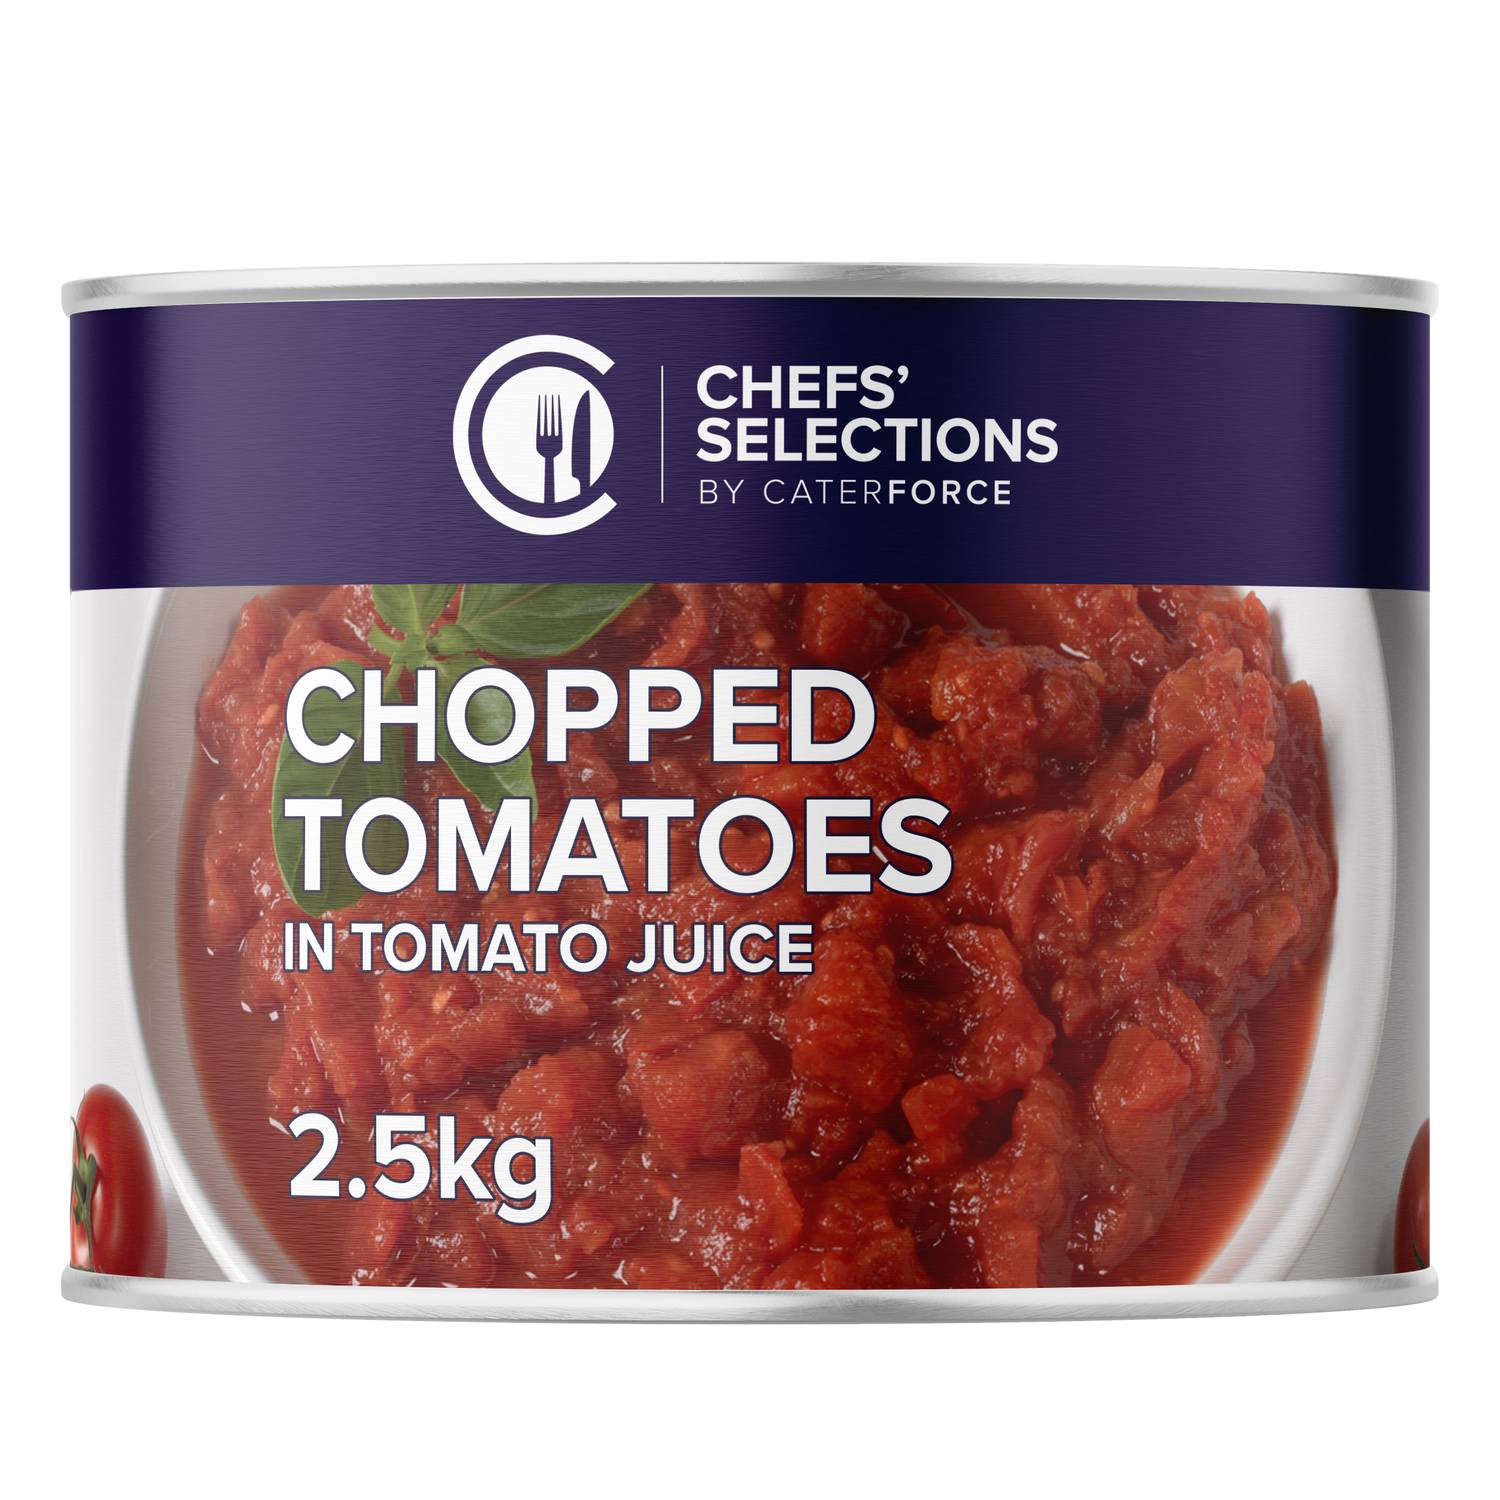 Chefs’ Selections Chopped Tomatoes in Tomato Juice (6 x 2.5kg)